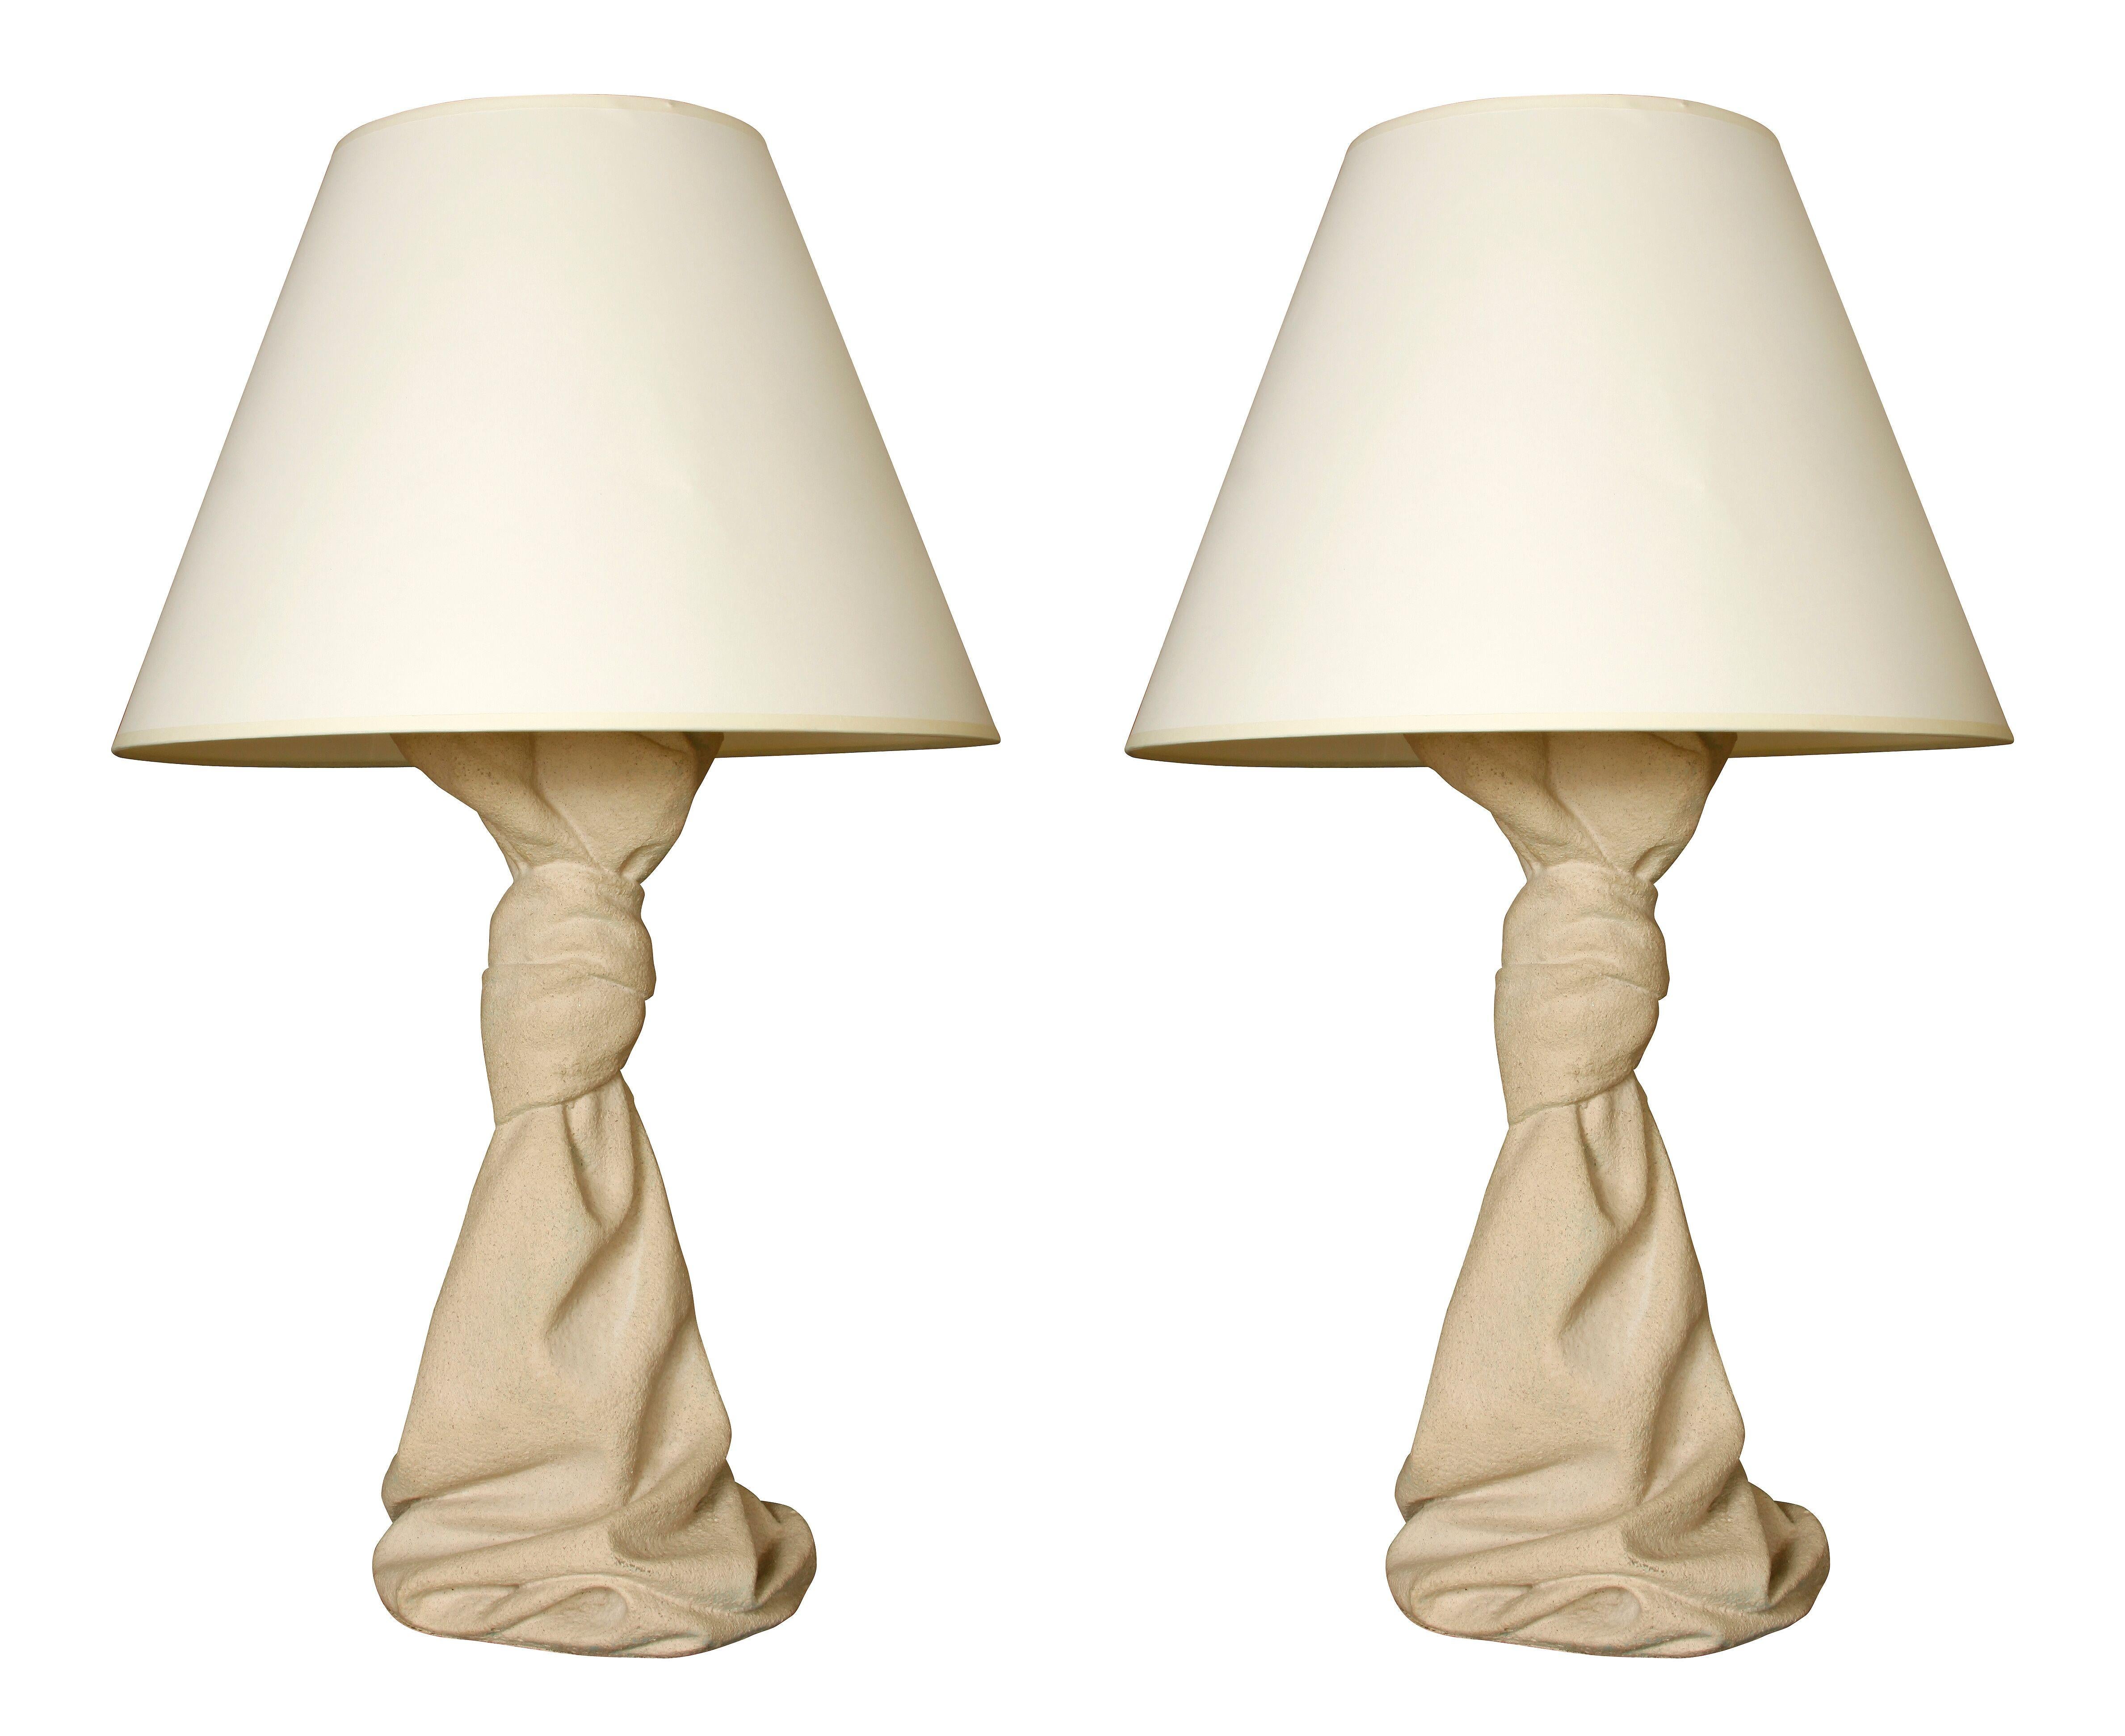 A pair of Stone John Dickinson style chalk table lamps
Measures: 31